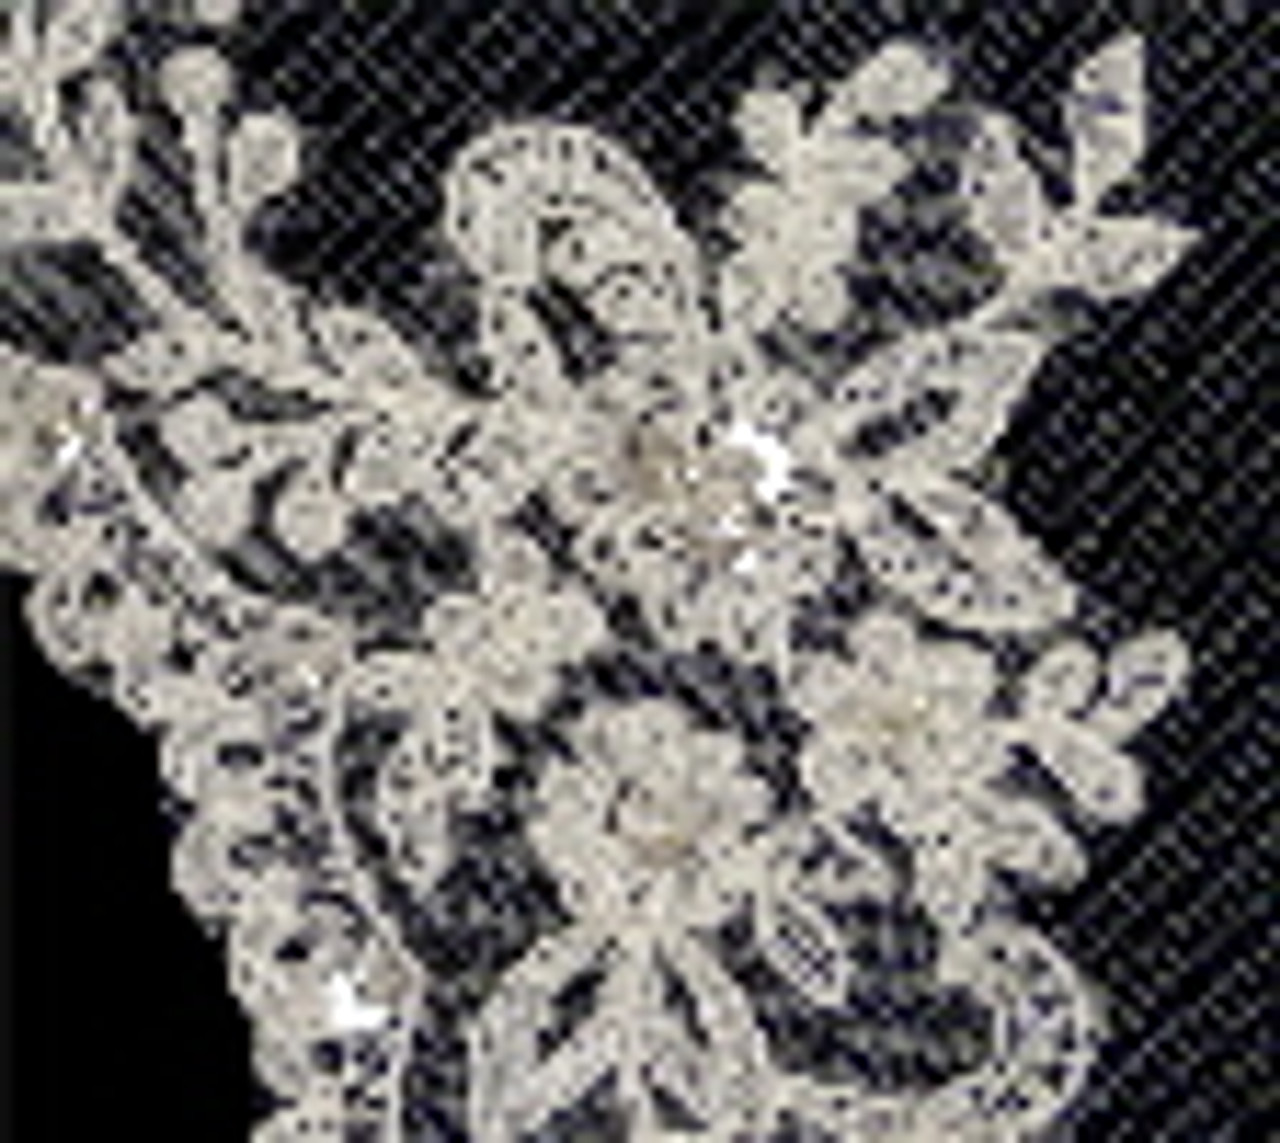 LC Bridal Lace Veil - V2329-650  42x72" wide - Alencon lace adorned with silver seed beads and sequins 